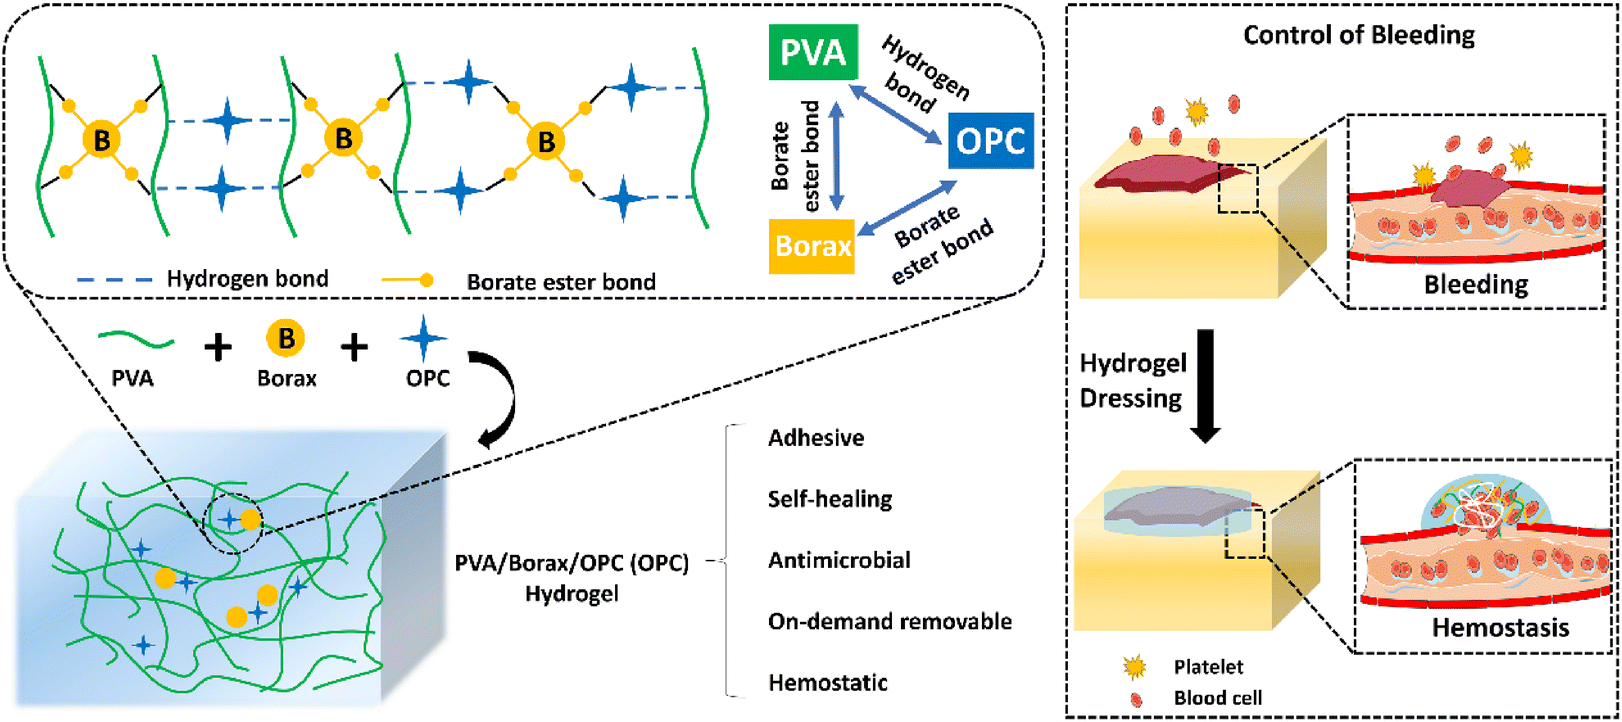 One possible mechanism of the formation of Borax-PVA Hydrogel